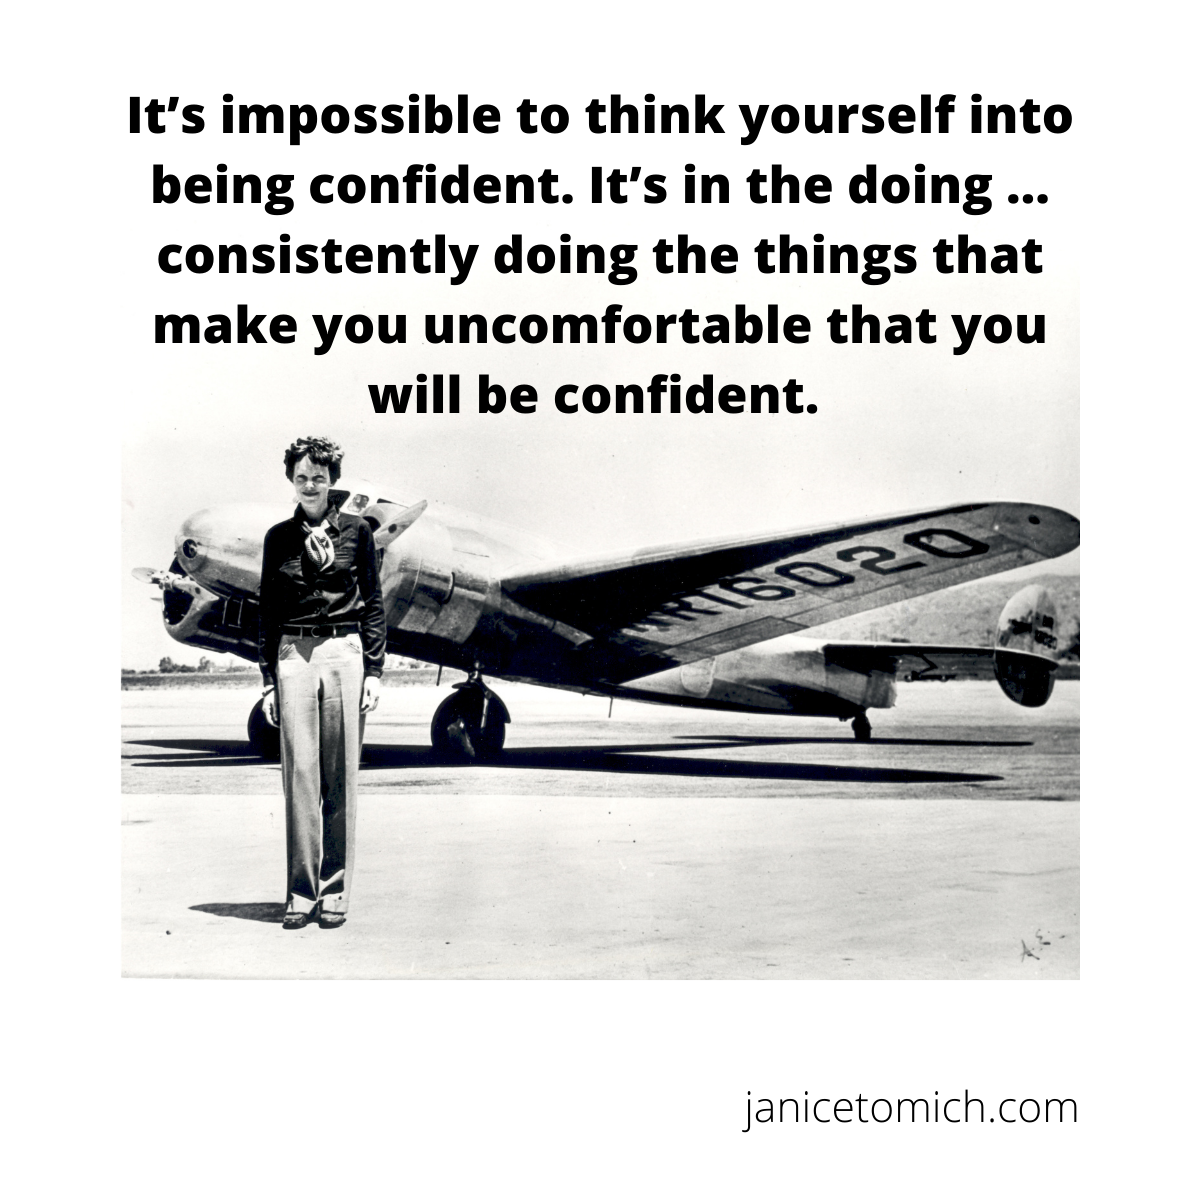 Inspirational quote by by Janice Tomich about women public speaking "It's impossible to think yourself into being confident. It's in the doing ... it is through consistently doing the things that make you uncomfortable that you will become confident."